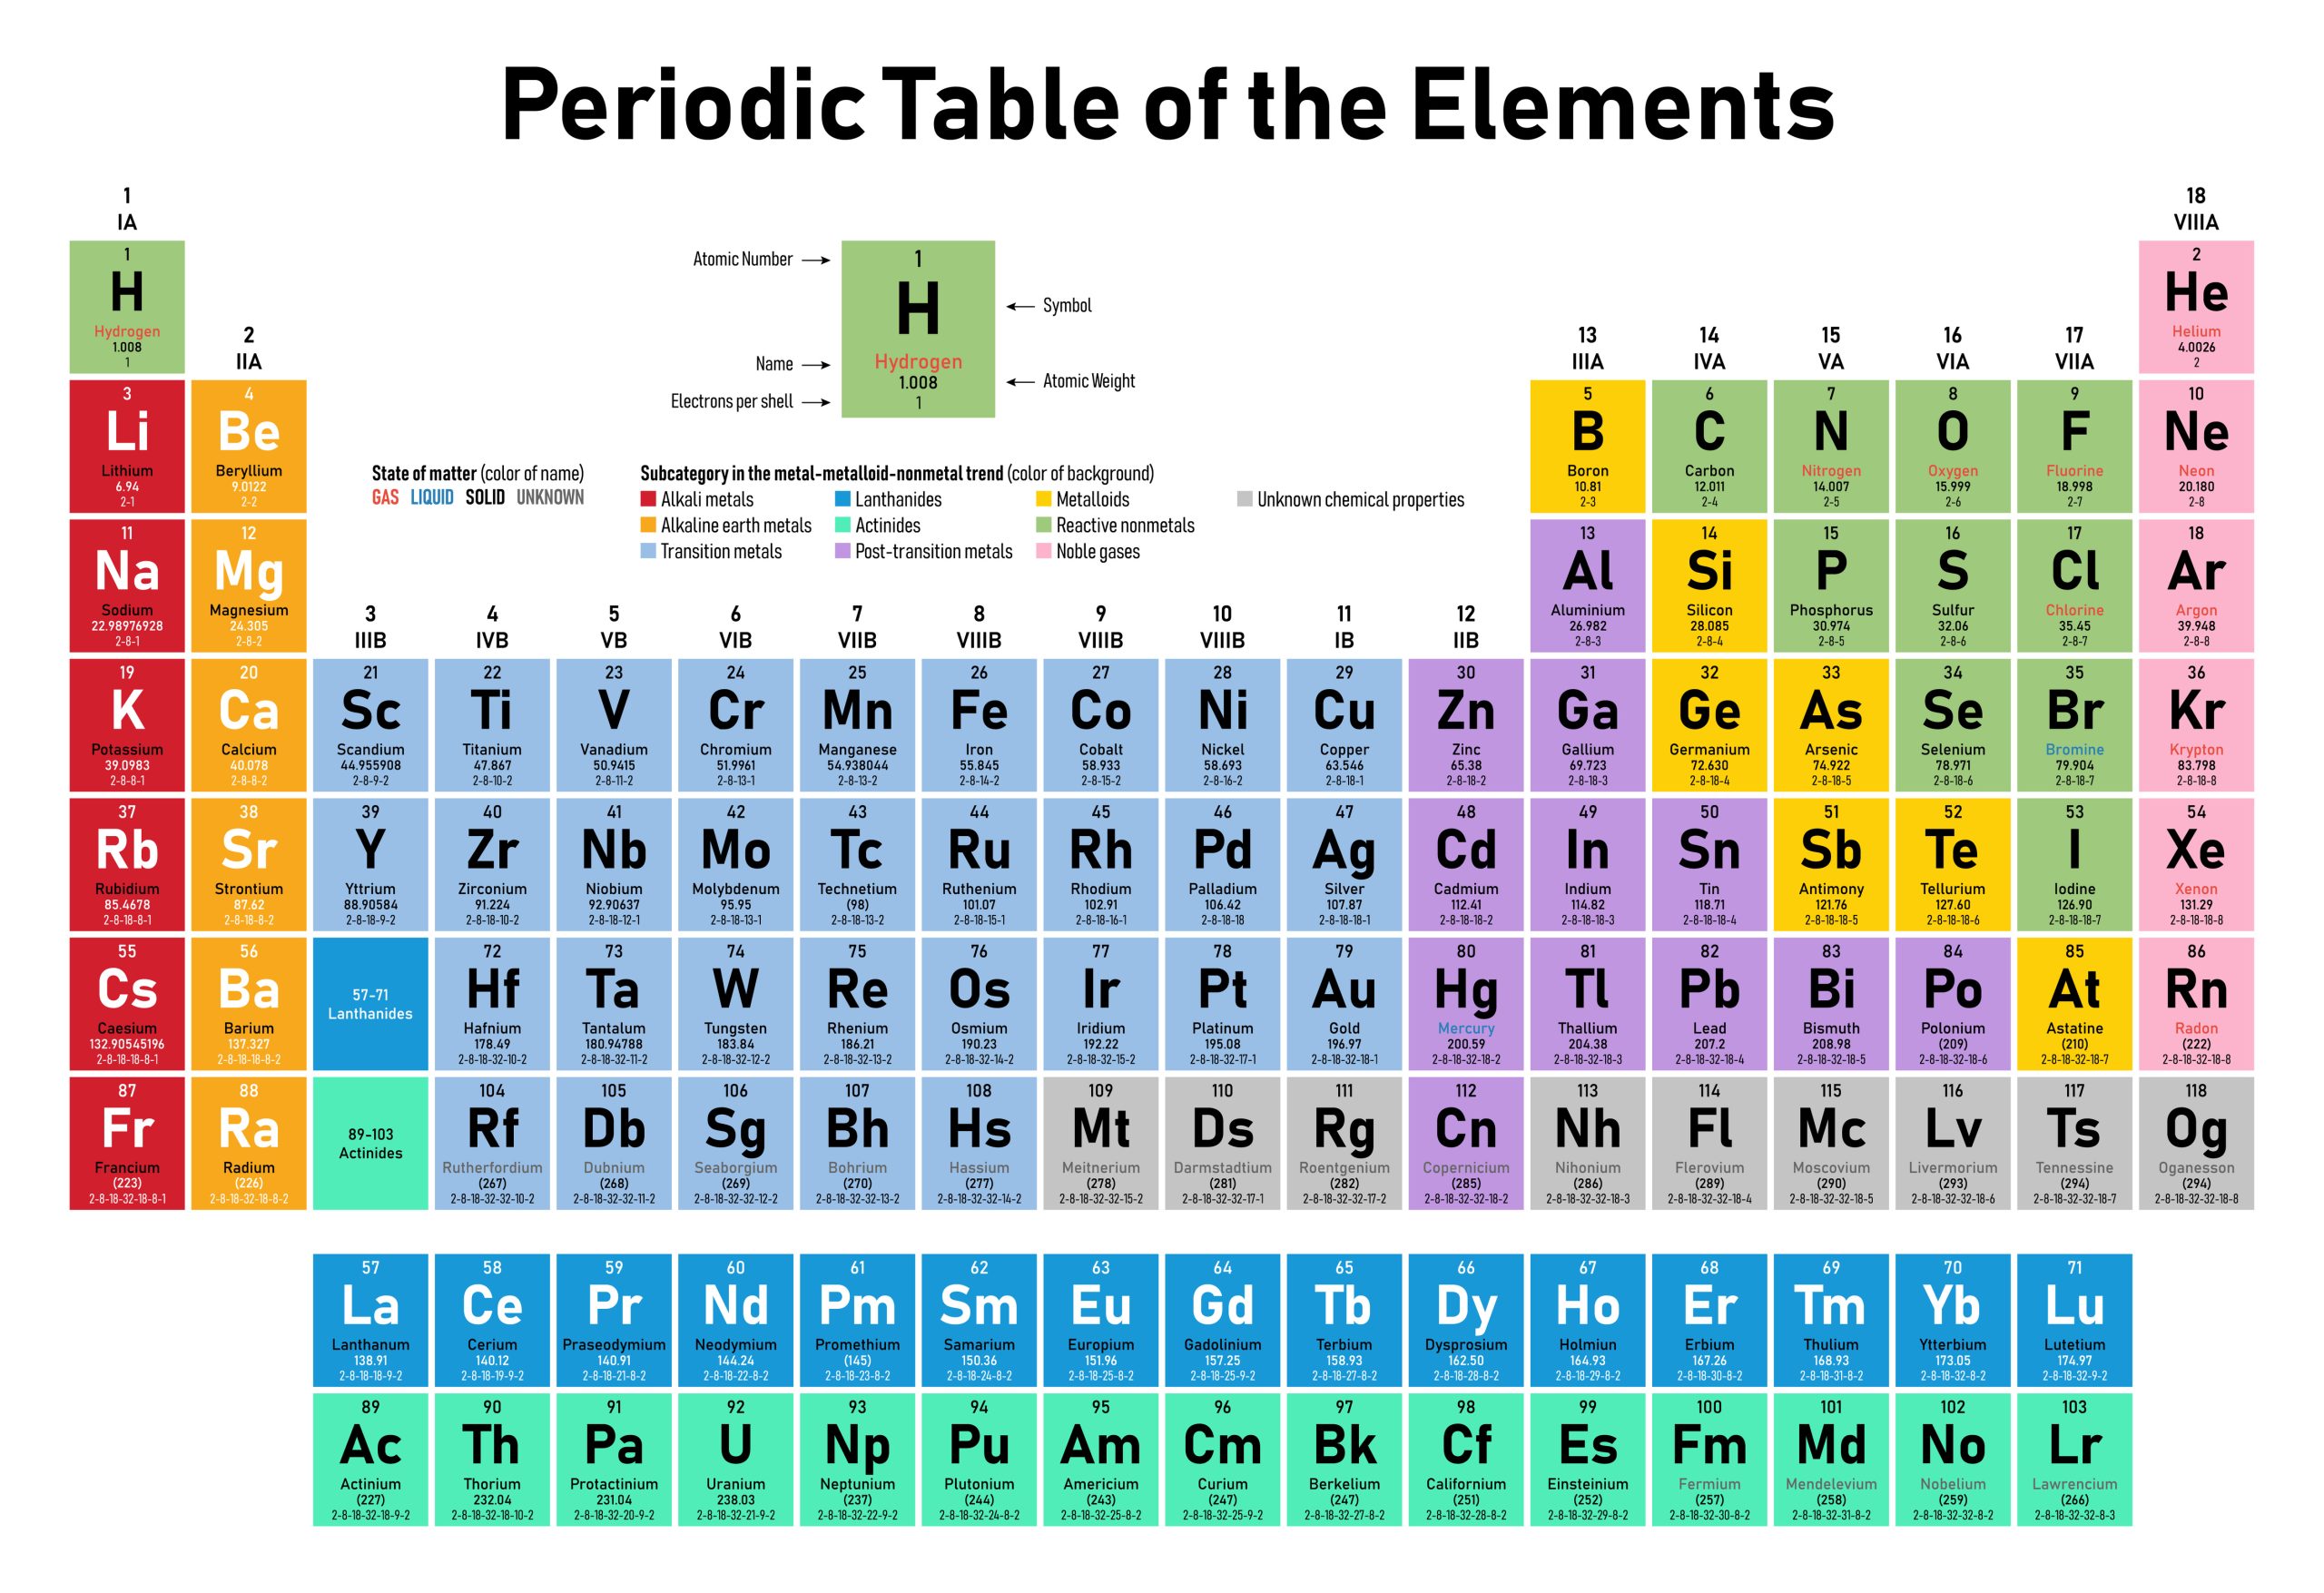 View an <a href="https://www.rsc.org/periodic-table">accessible periodic table online</a>.